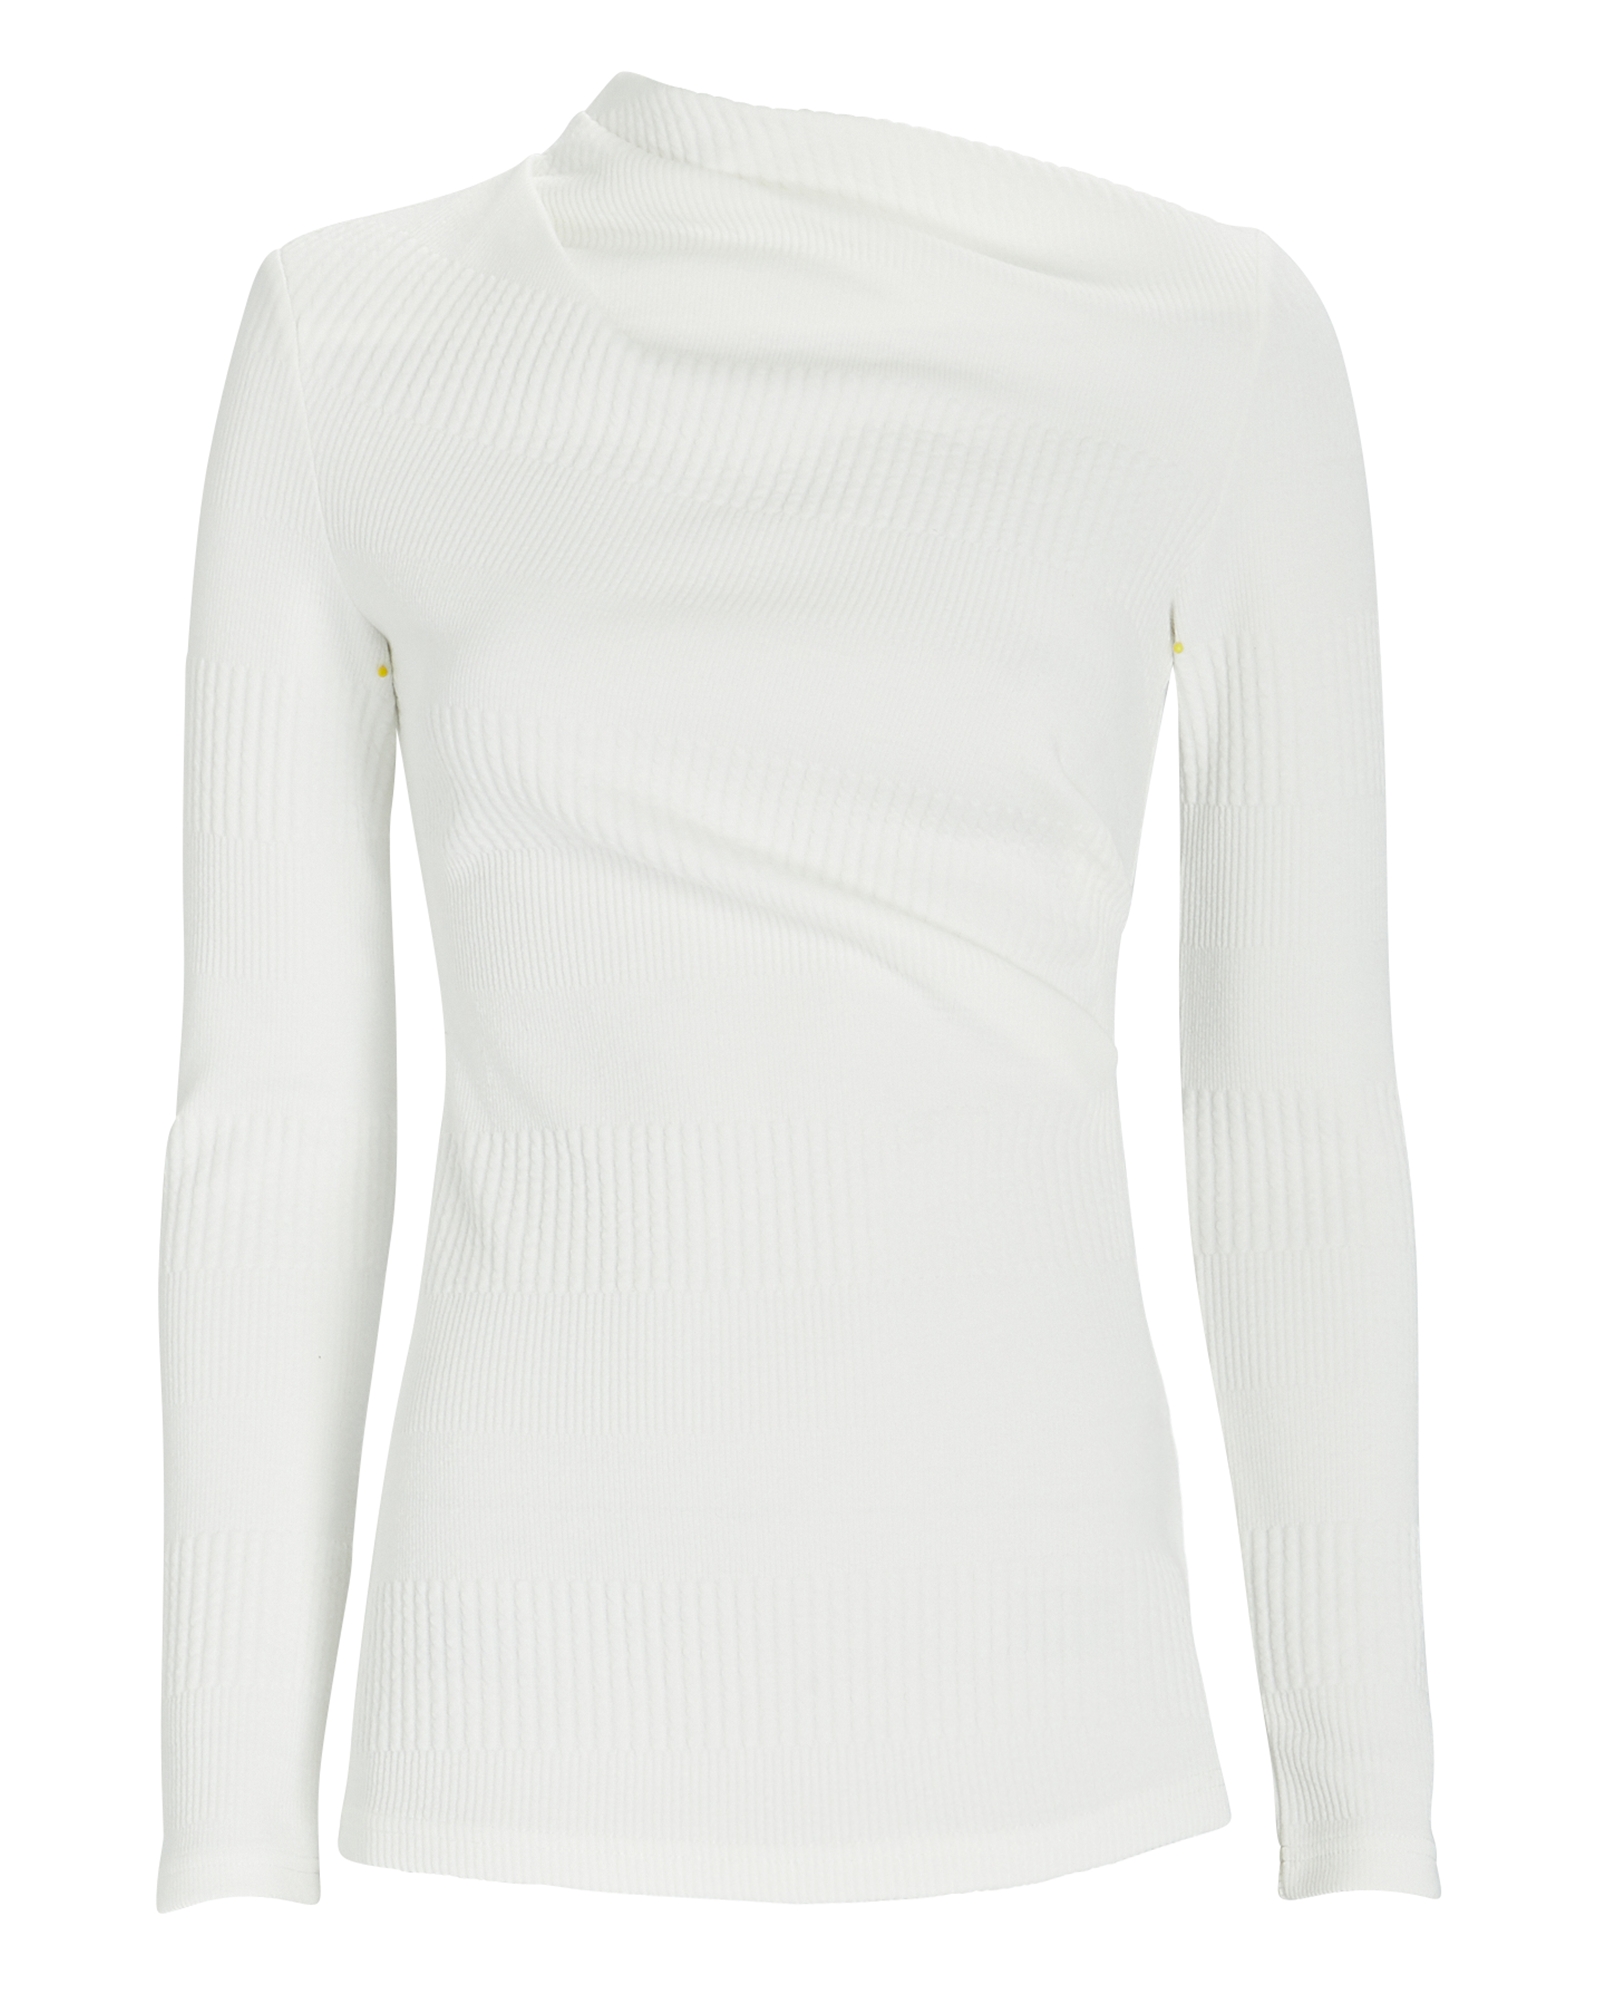 Acler Parkway High Neck Knit Top | INTERMIX®